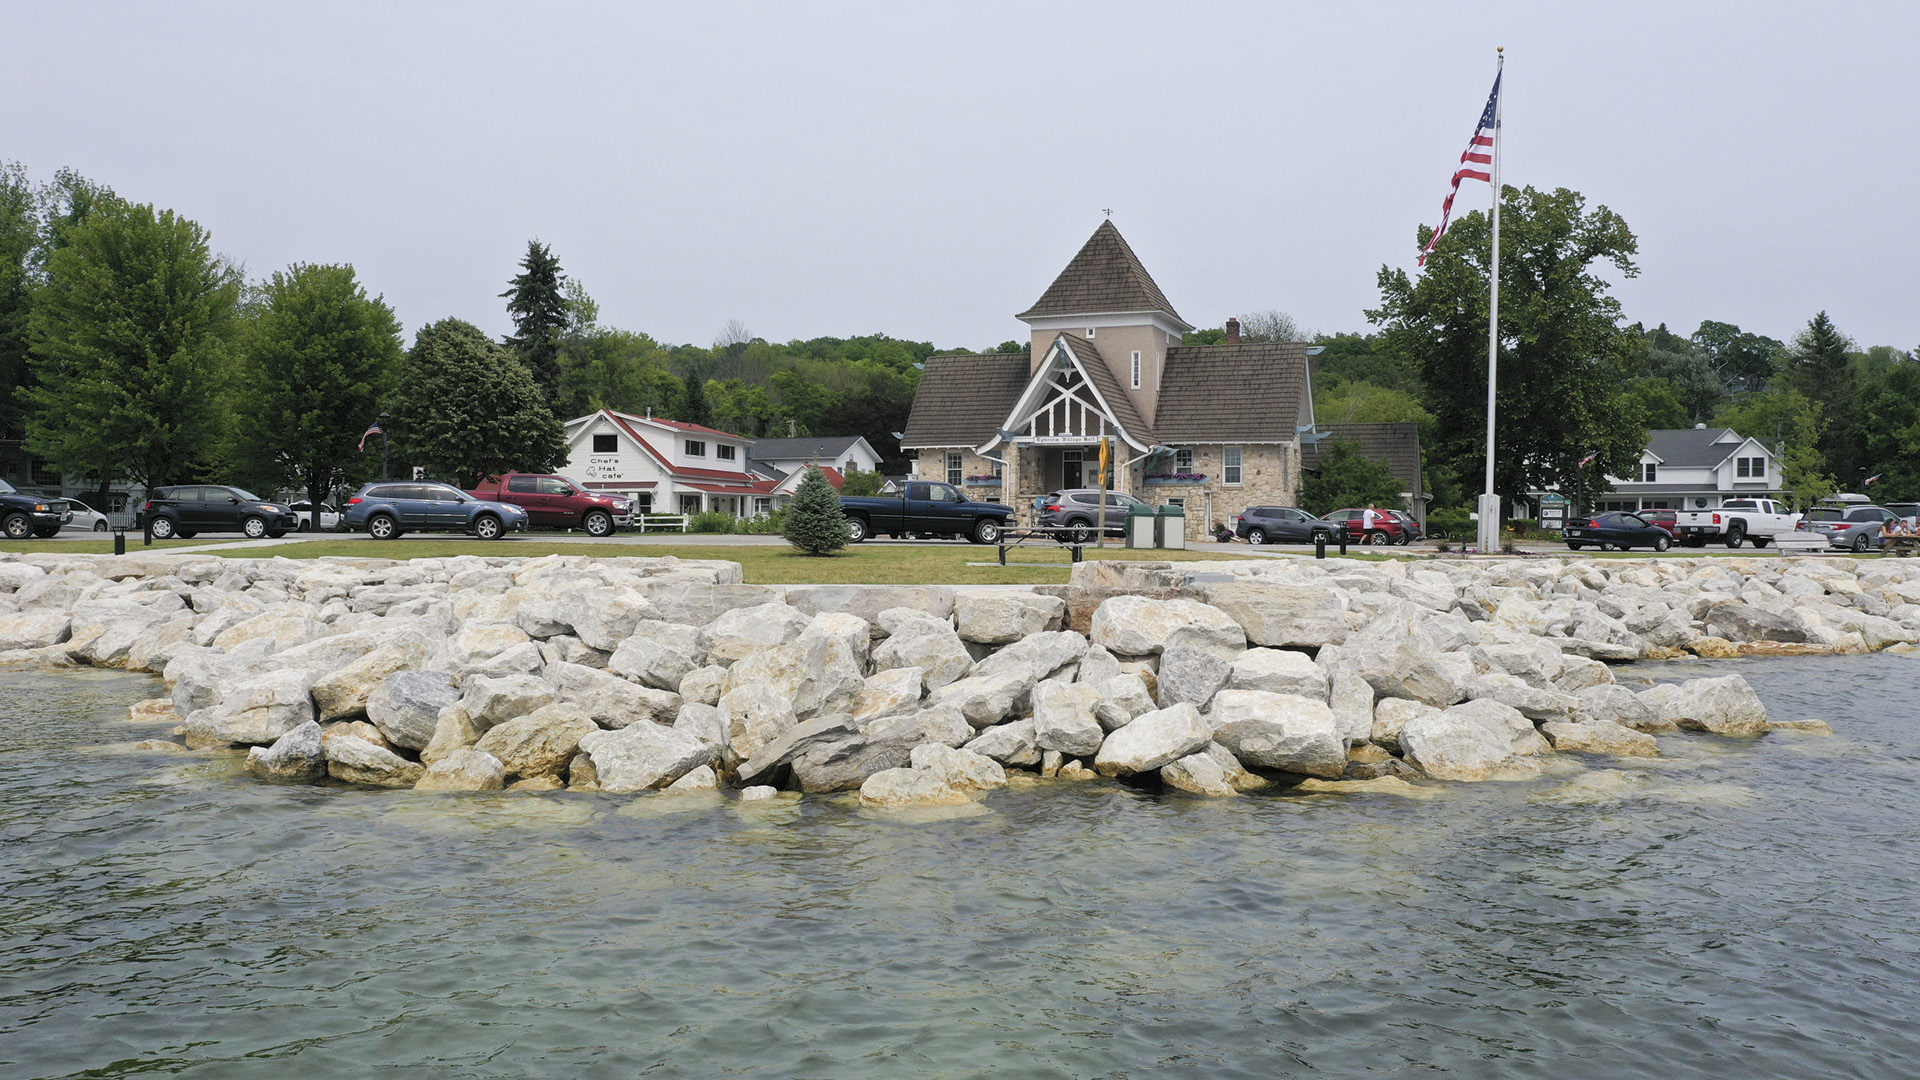 Large boulders line a lake shoreline with buildings and cars on the land above.